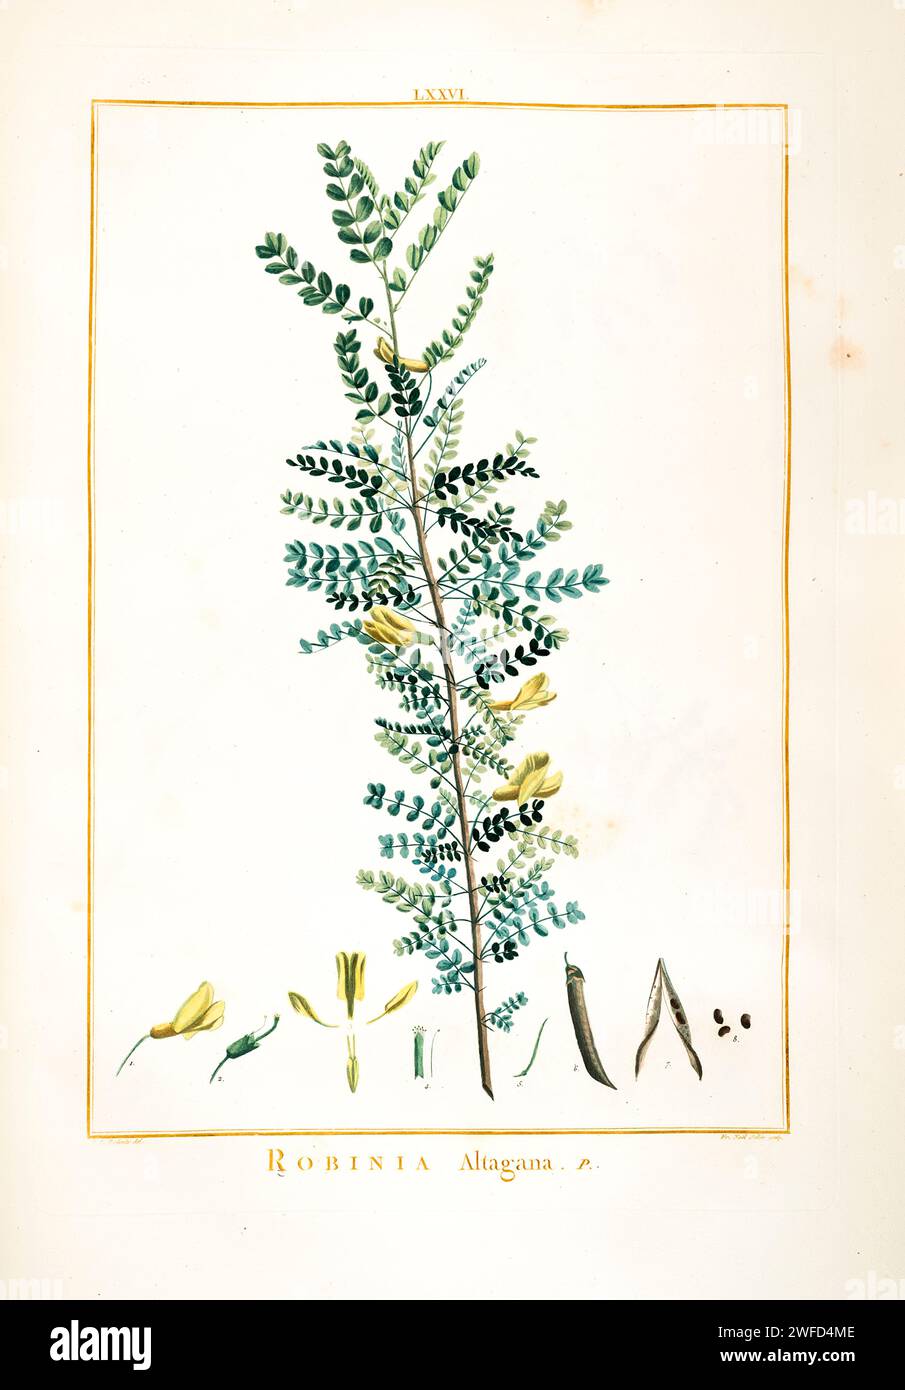 Robinia altagana syn Caragana arborescens Hand Painted by Pierre-Joseph Redouté and published in Stirpes Novae aut Minus Cognitae (1784) by Charles Louis L'Héritier de Brutelle. Caragana arborescens, the Siberian peashrub, Siberian pea-tree, or caragana, is a species of legume native to Siberia and parts of China and neighboring Mongolia and Kazakhstan. It was taken to the United States by Eurasian immigrants, who used it as a food source while travelling west. Stock Photo